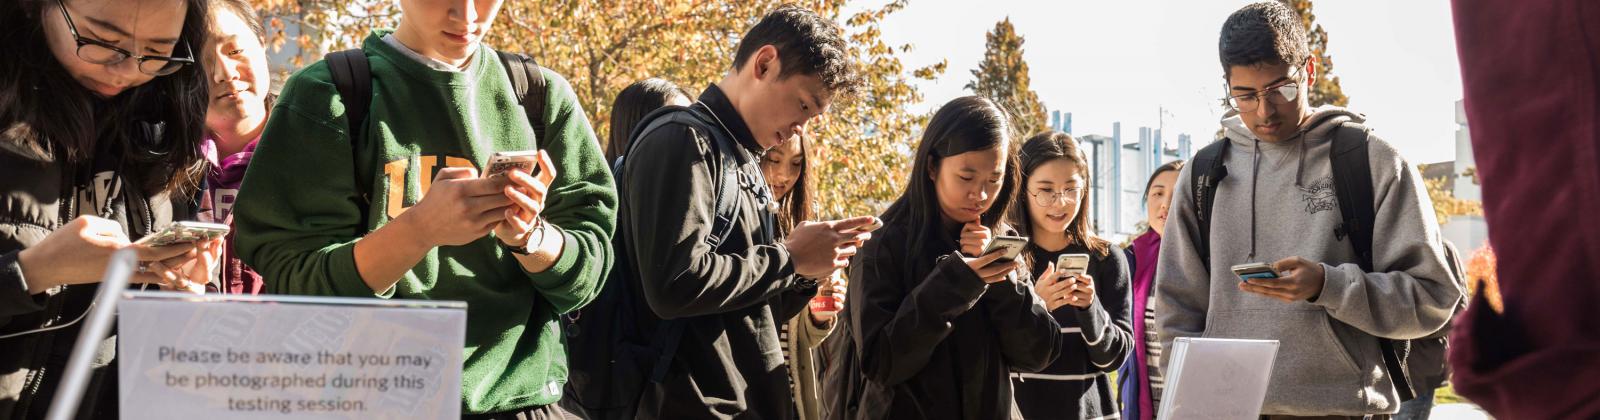 A group of students standing outdoors on their phones participating in UX research